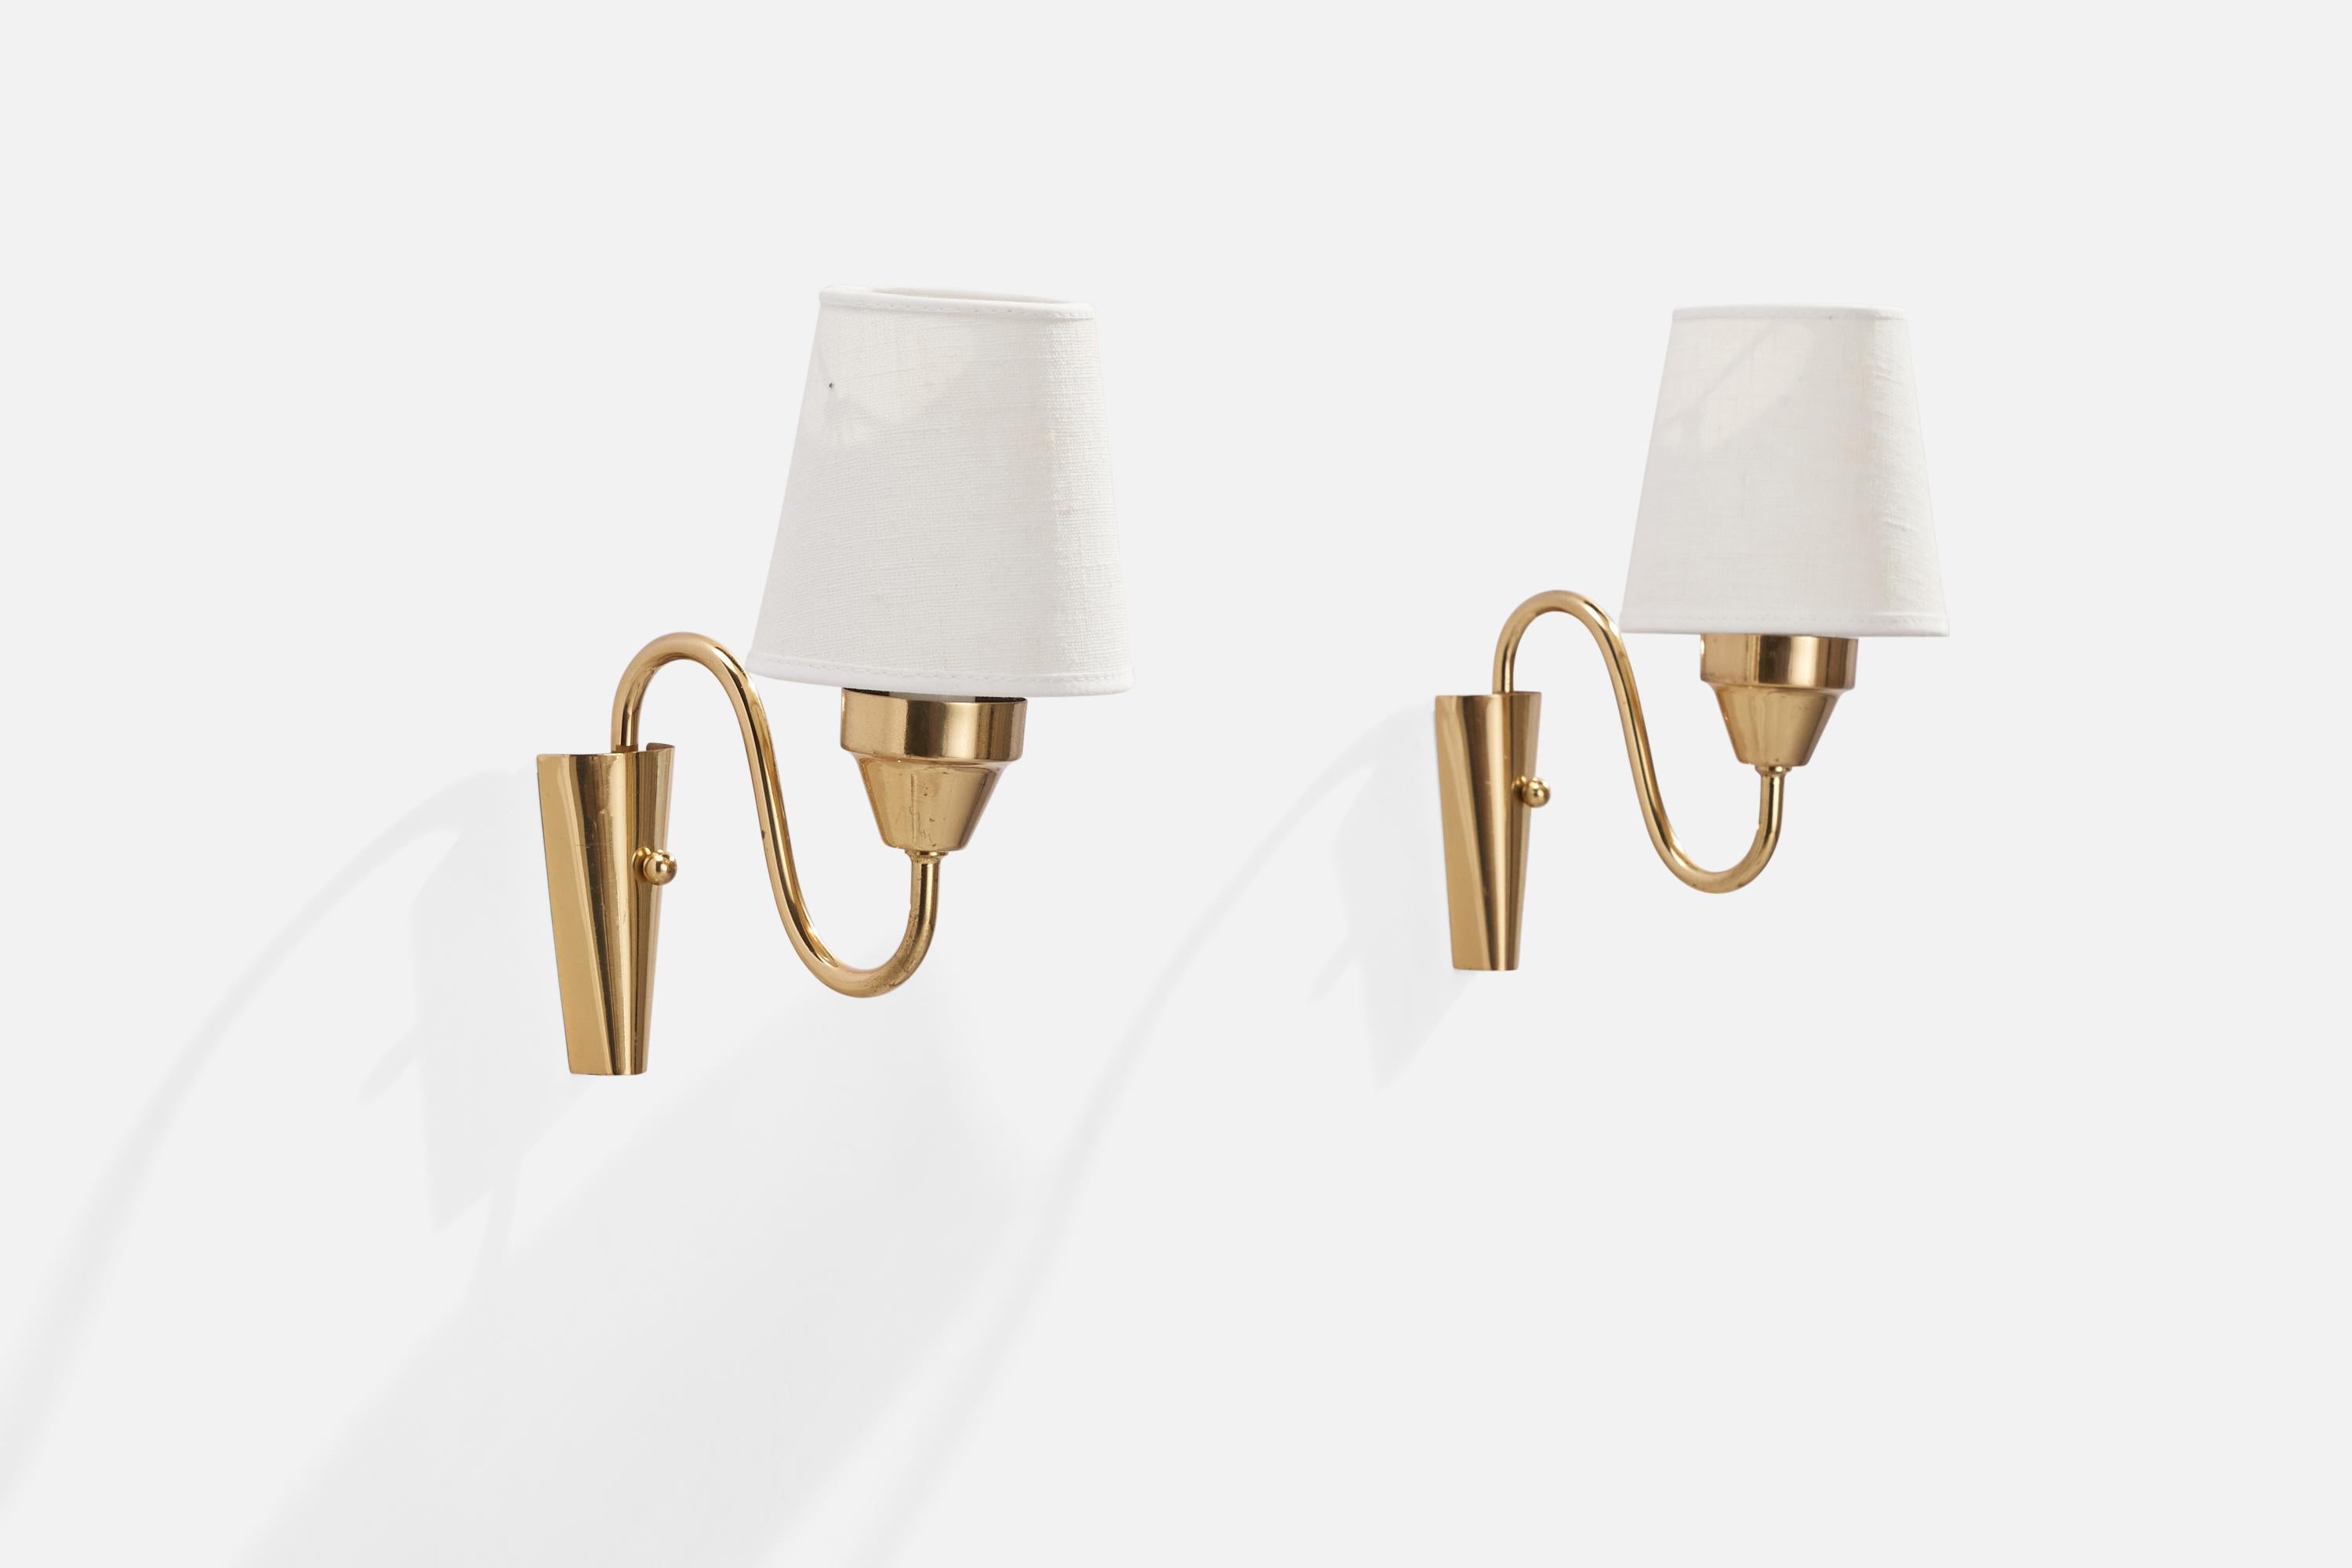 A pair of brass and white fabric wall lights designed and produced by Falkenbergs Belysning, Sweden, 1960s.

Overall Dimensions (inches): 5”  H x 2”  W x 5.50”  D
Back Plate Dimensions (inches): 3.5”  H x 1.75” W x .75” D
Bulb Specifications: E-14